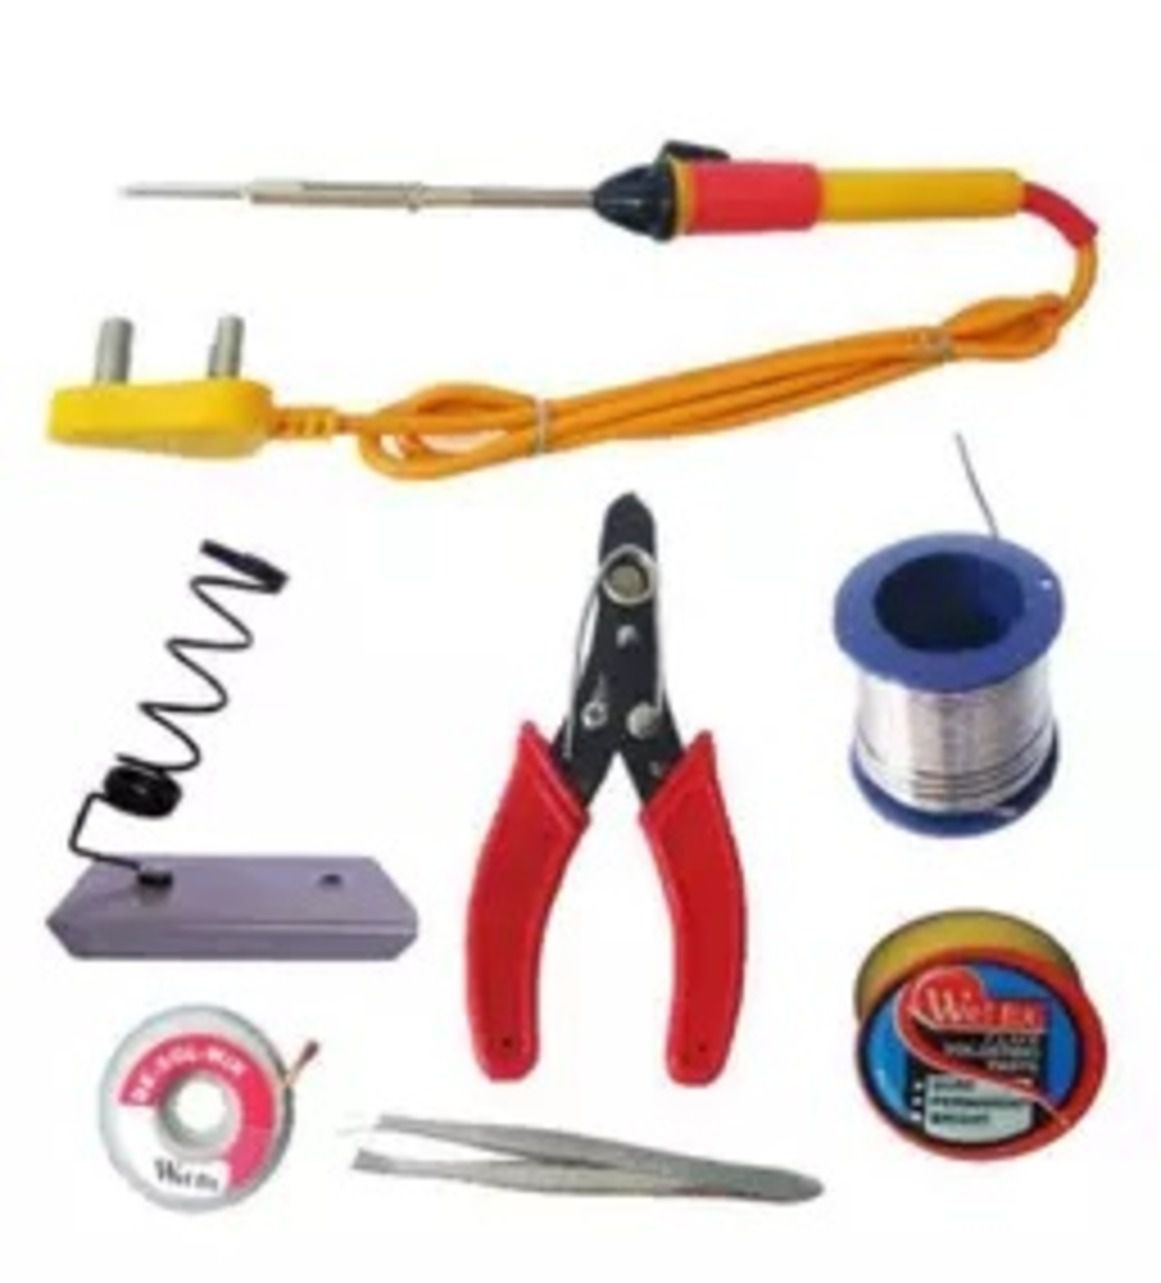     			UNIQUE 7 in 1 Electric Soldering/Welding Iron Kit For DIY/Crafts Soldering Iron